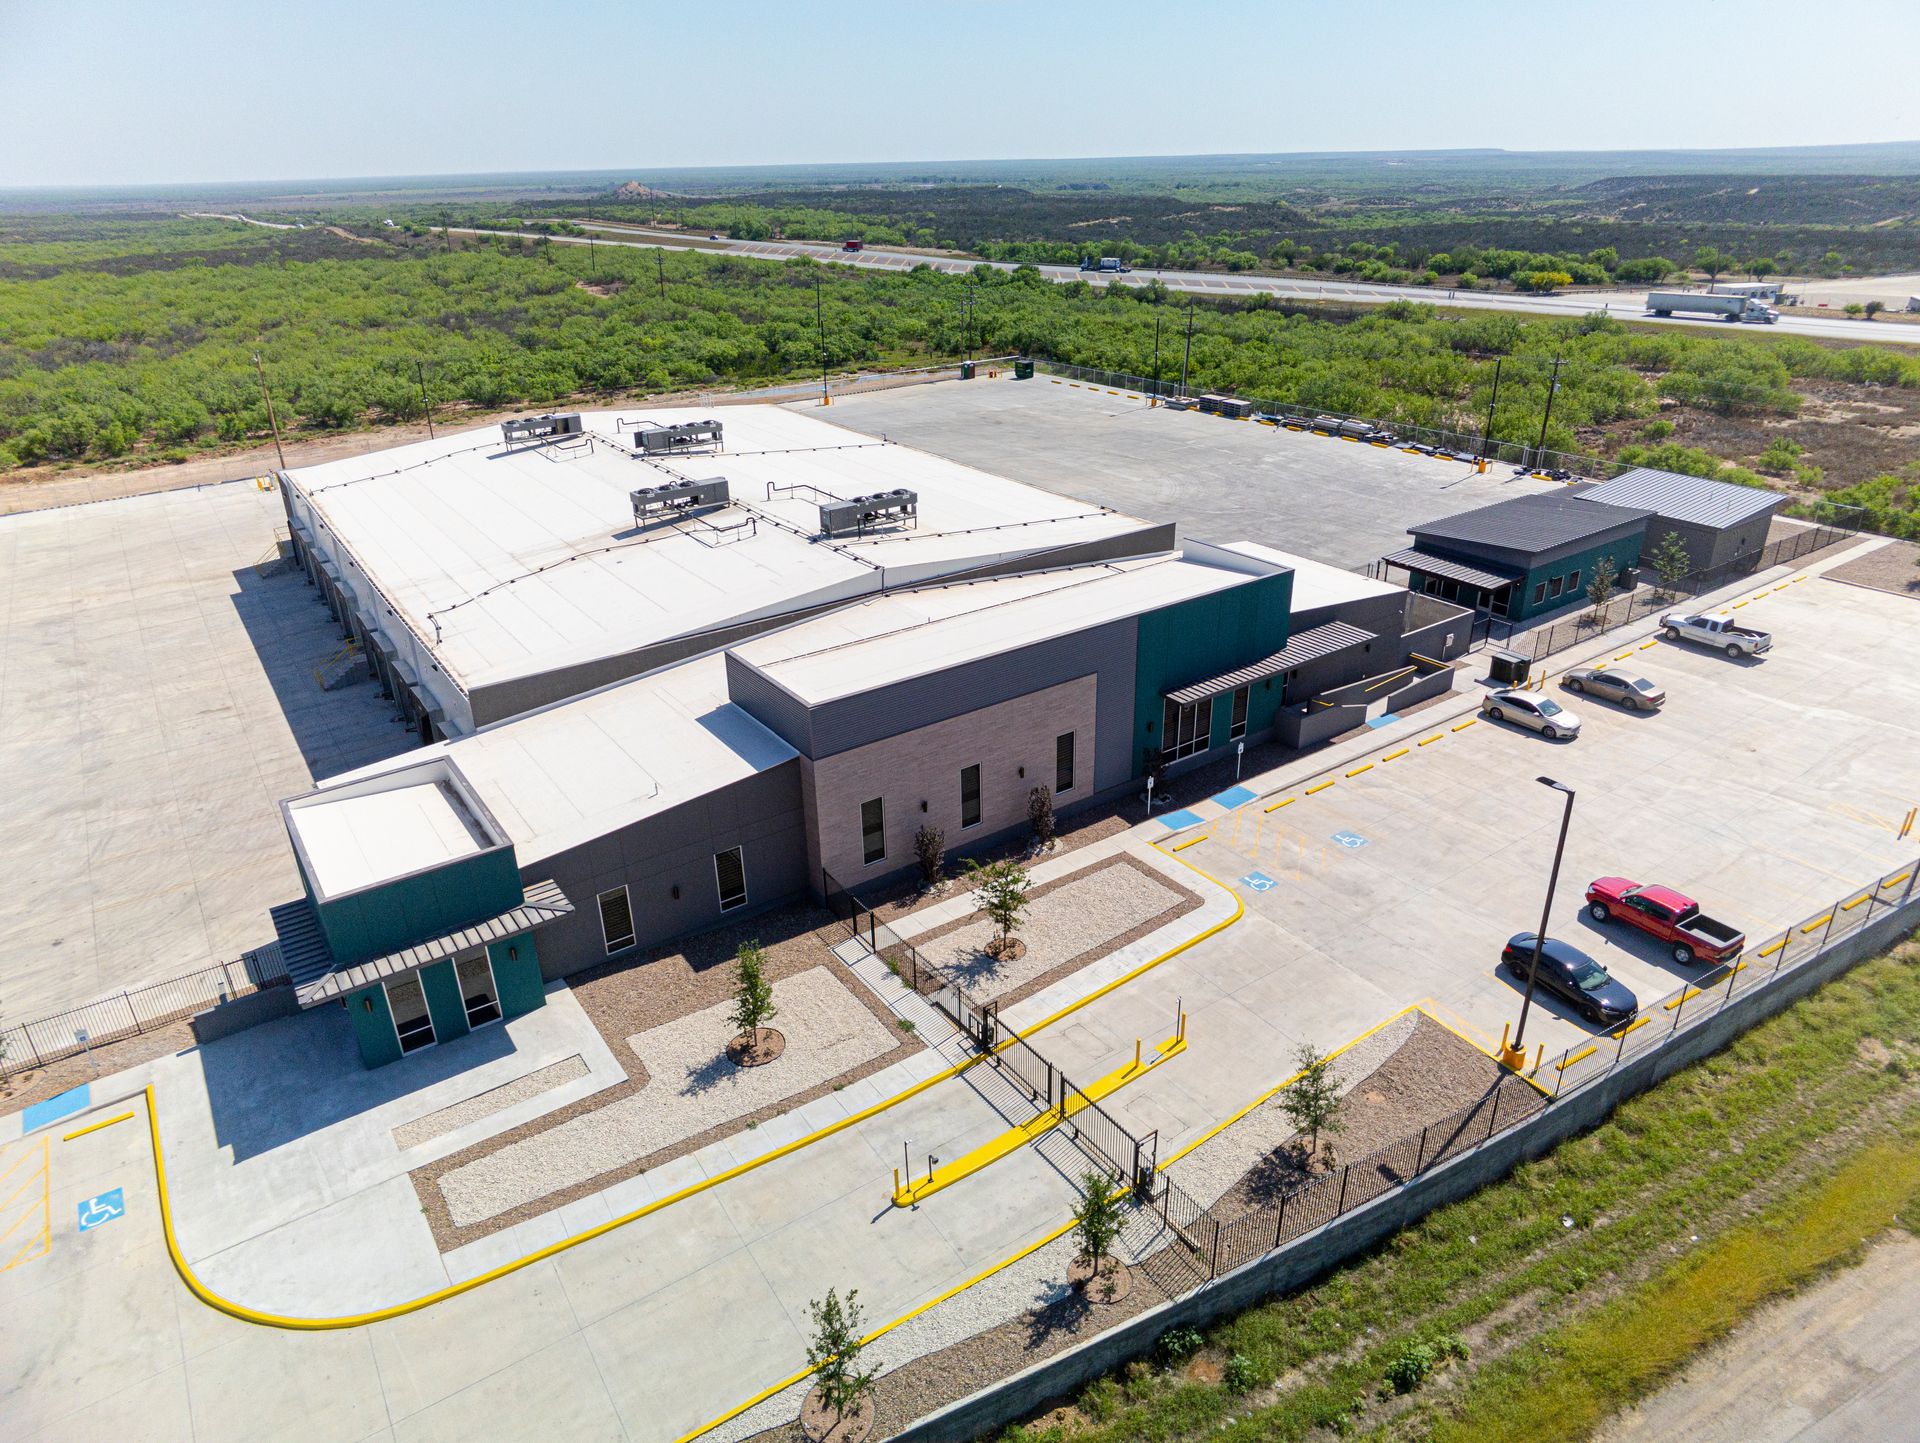 Quantum Building Services finishes construction on a new facility for Garros Services in Laredo, Tx.